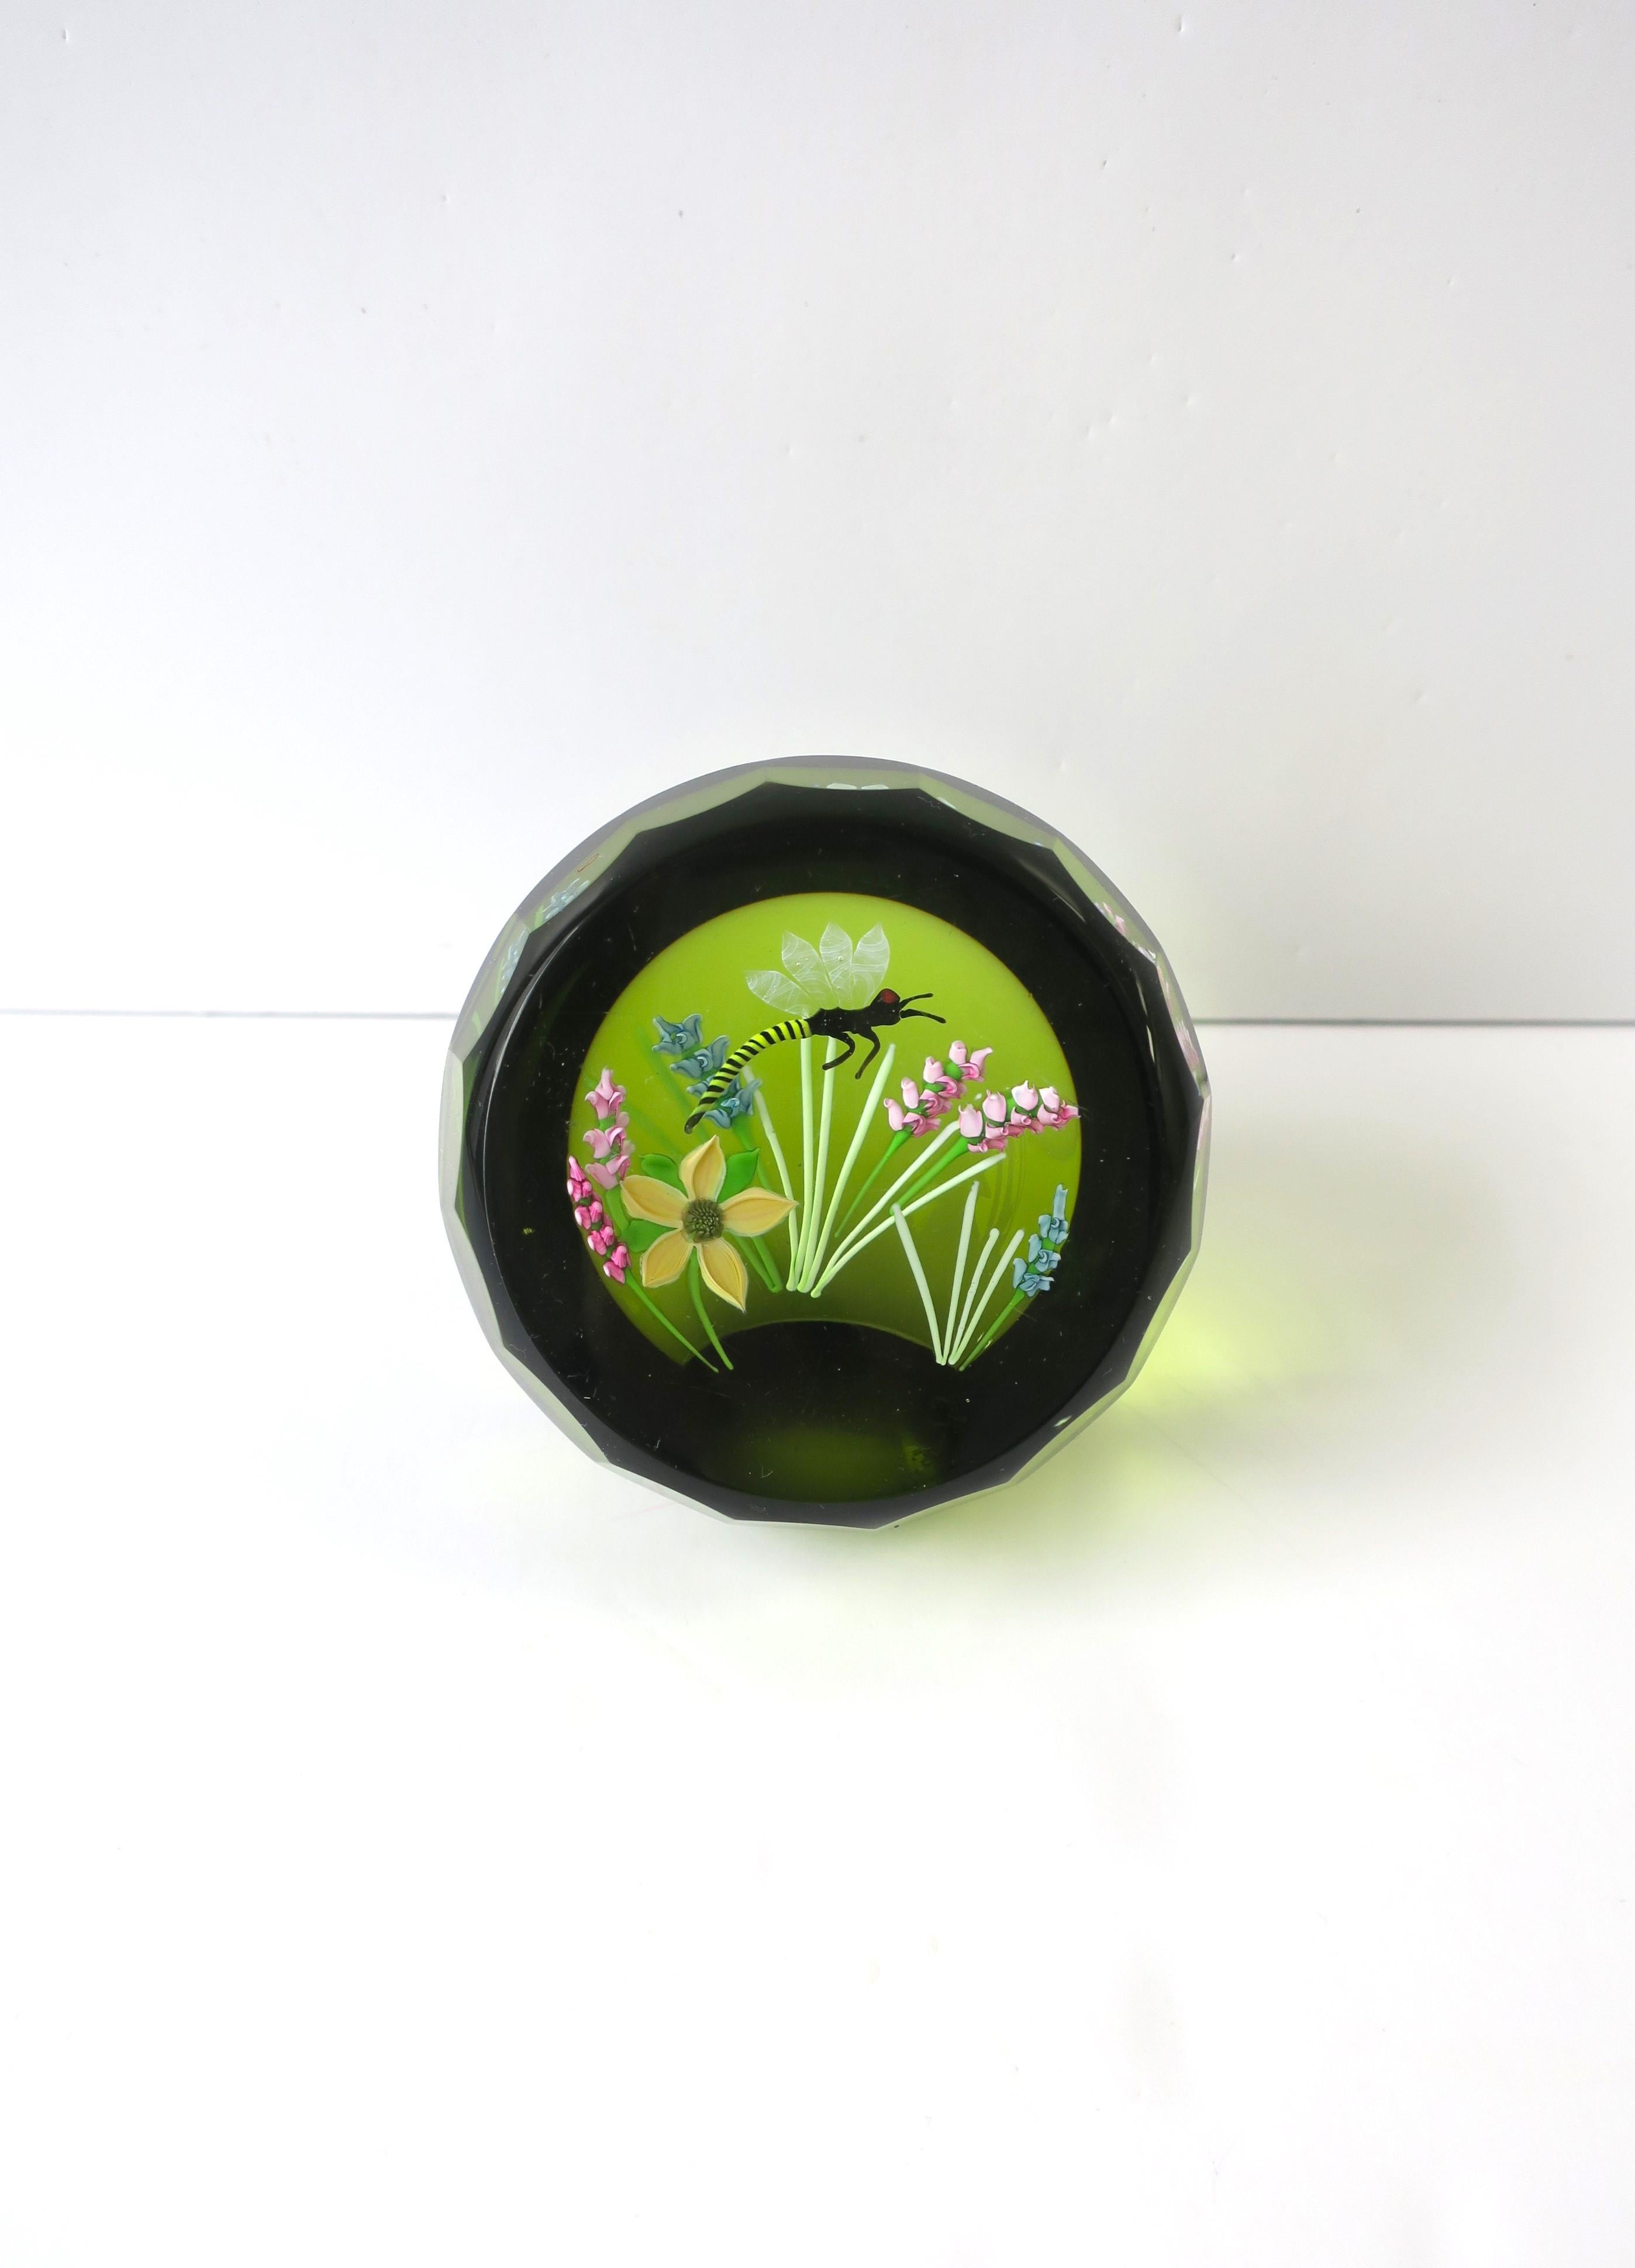 A beautiful, handcrafted Scottish studio art glass 'Dragonfly' garden paperweight decorative object, made in Scotland, circa late-20th century. A beautiful piece, a traveling garden if you will, with detailed dragonfly and flowers. A decorative